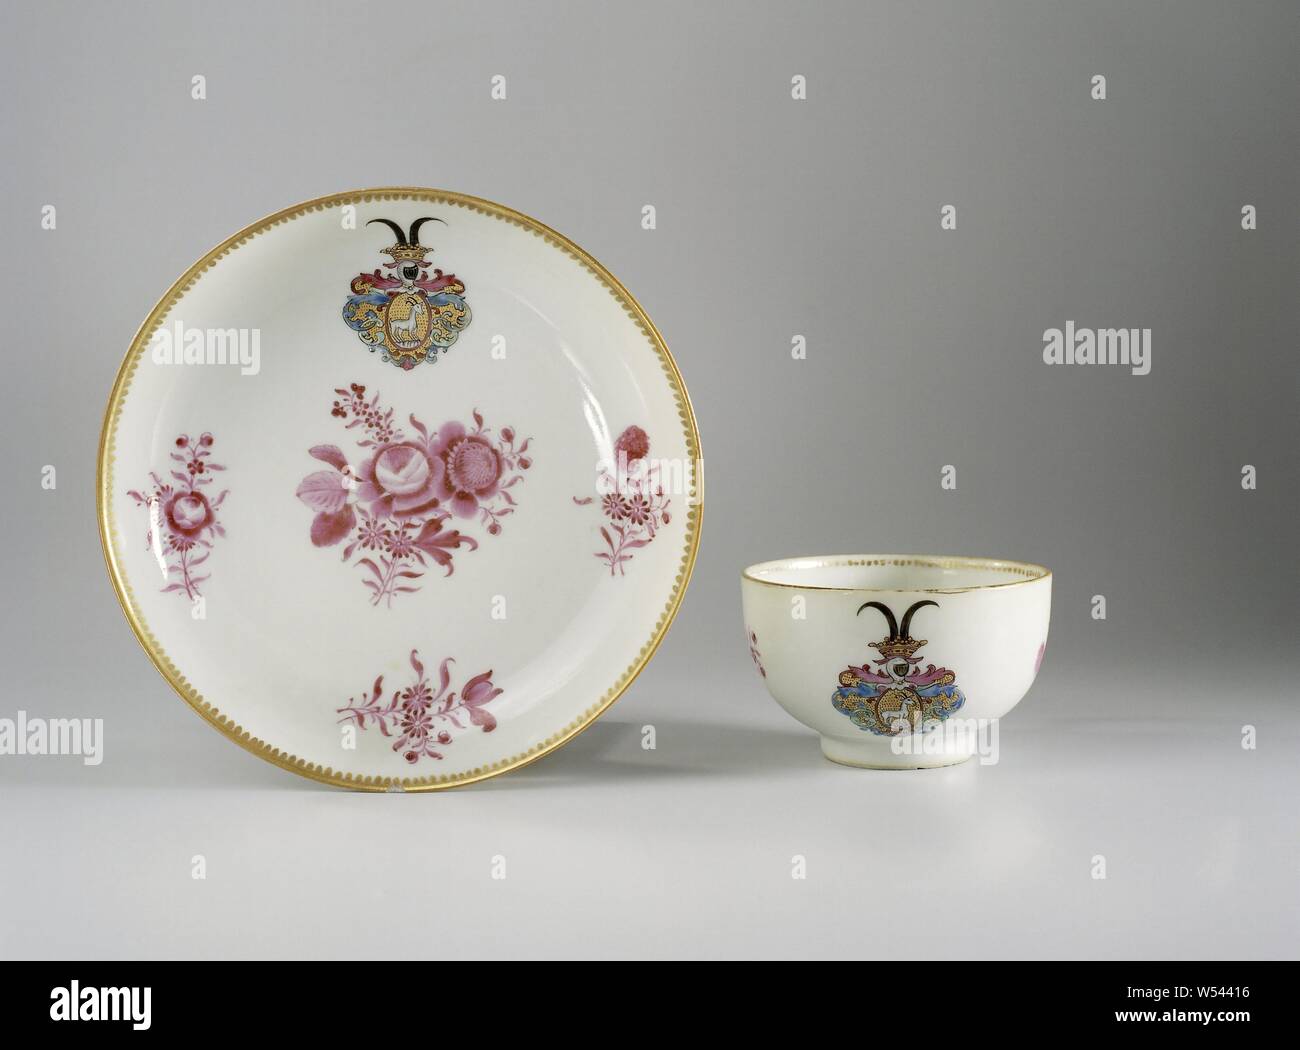 Cup with handle and saucer with flower bouquets and a coat of arms, Ear cup  and saucer of porcelain, painted on the glaze in blue, red, pink, green,  black and gold. On